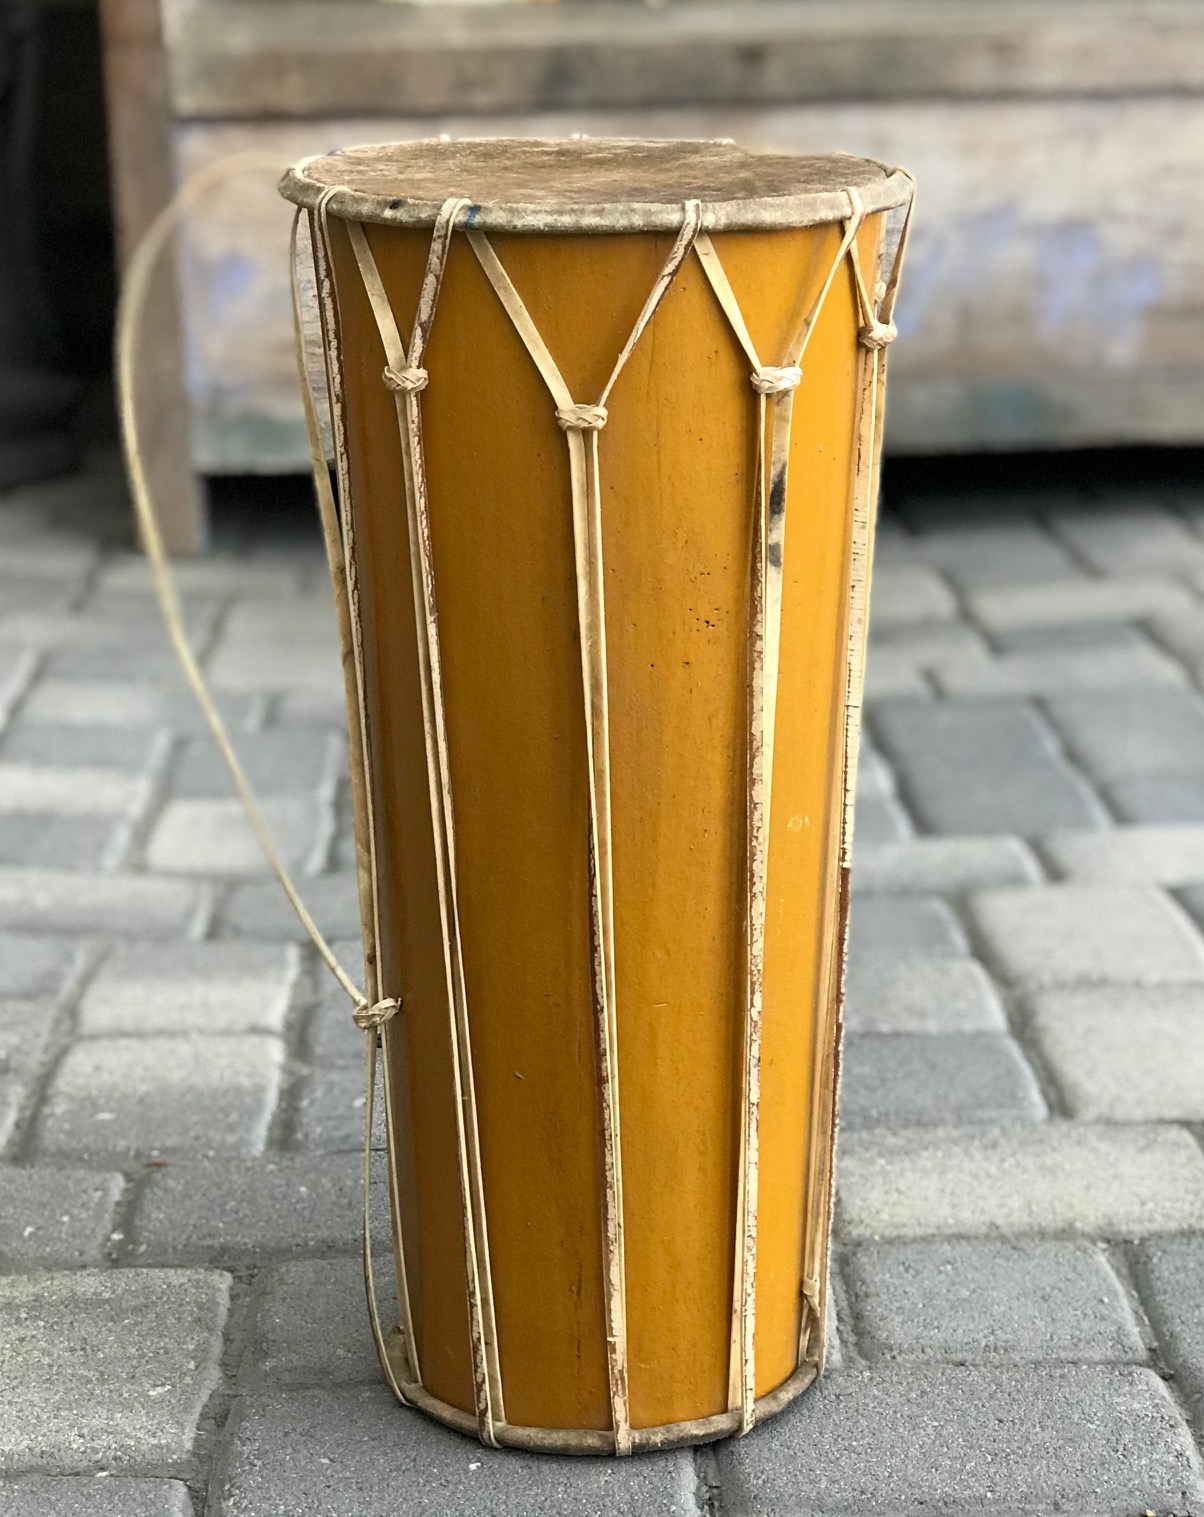 Double Headed Drum, Java, Indonesia, hide skin heads with hide lacing and tuning straps. wood and paint with metal rings for carrying strap, contemporary, 21" x 10" (top) x 7 3/4" (bottom); $440. ; thedavidalancollection.com , solana beach, ca